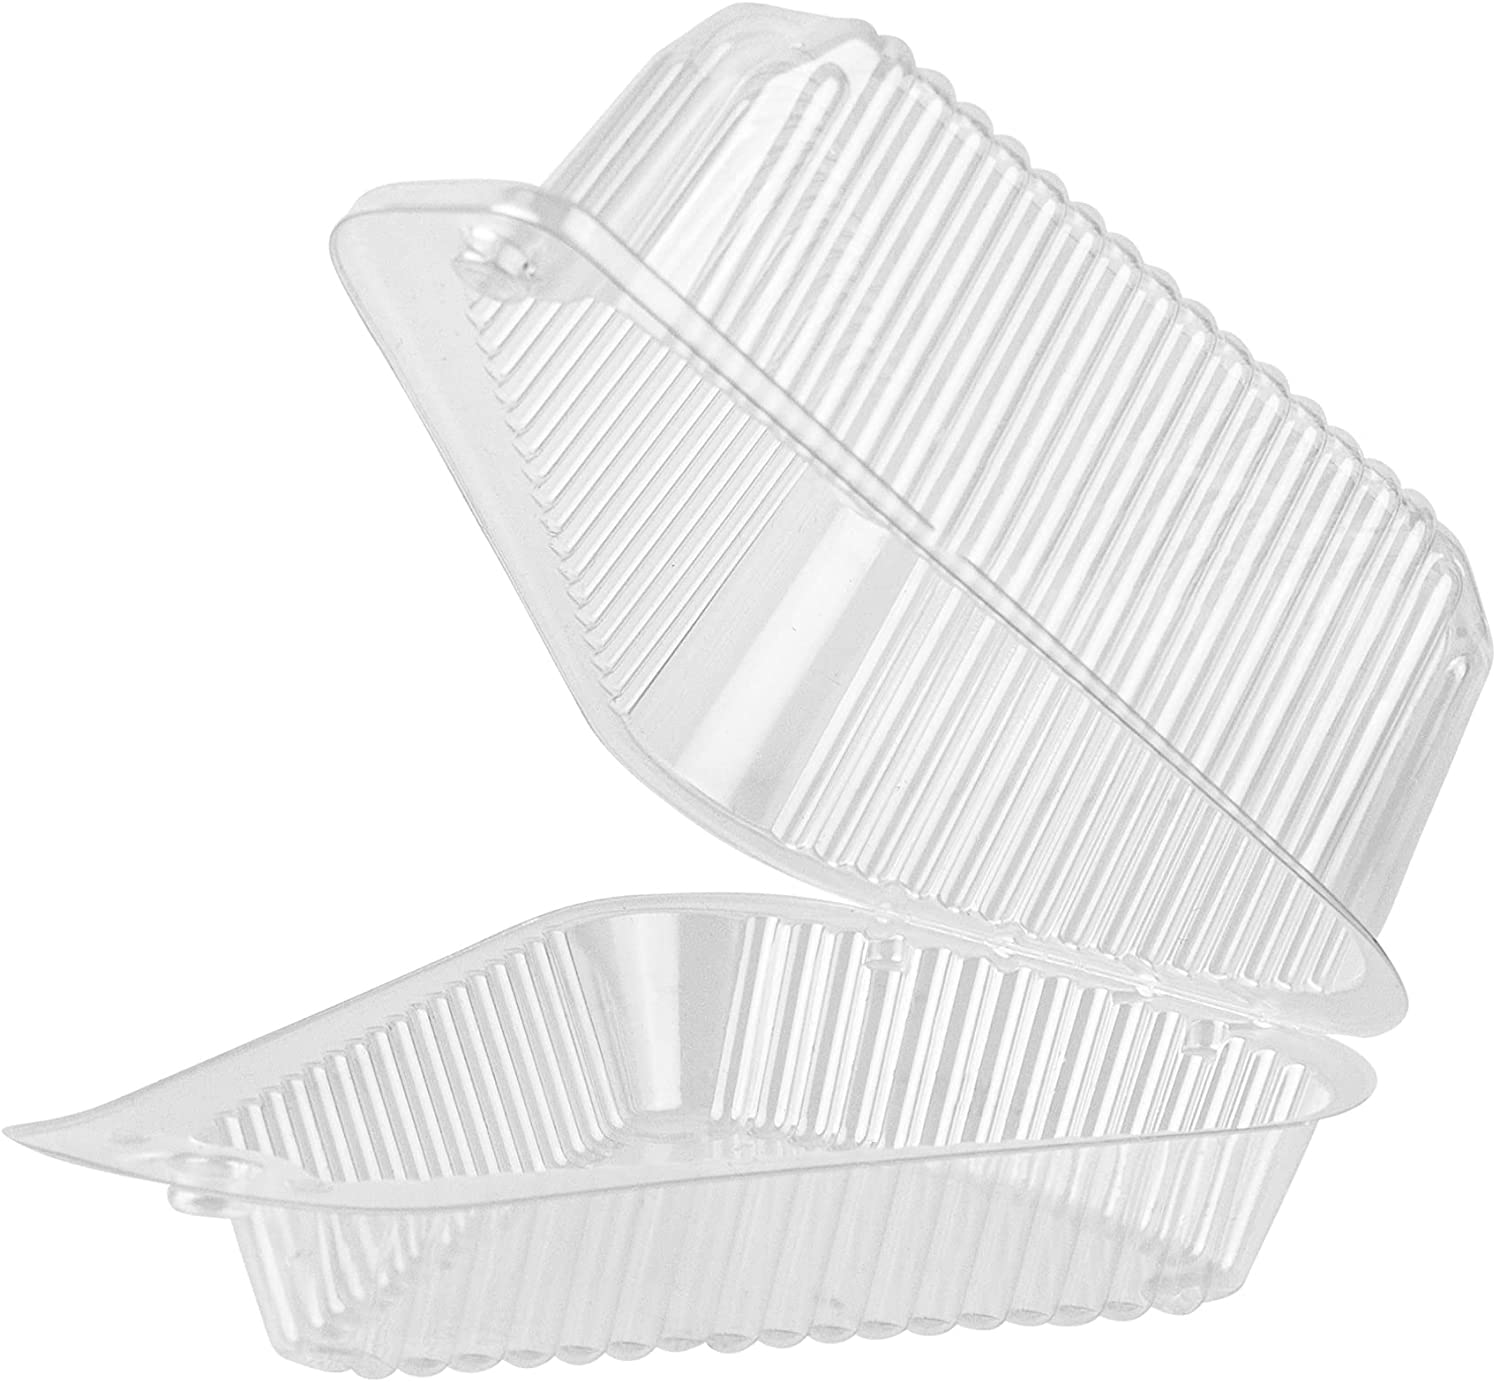 Plastic To-Go Containers And Lids - Rectangle - White With Clear